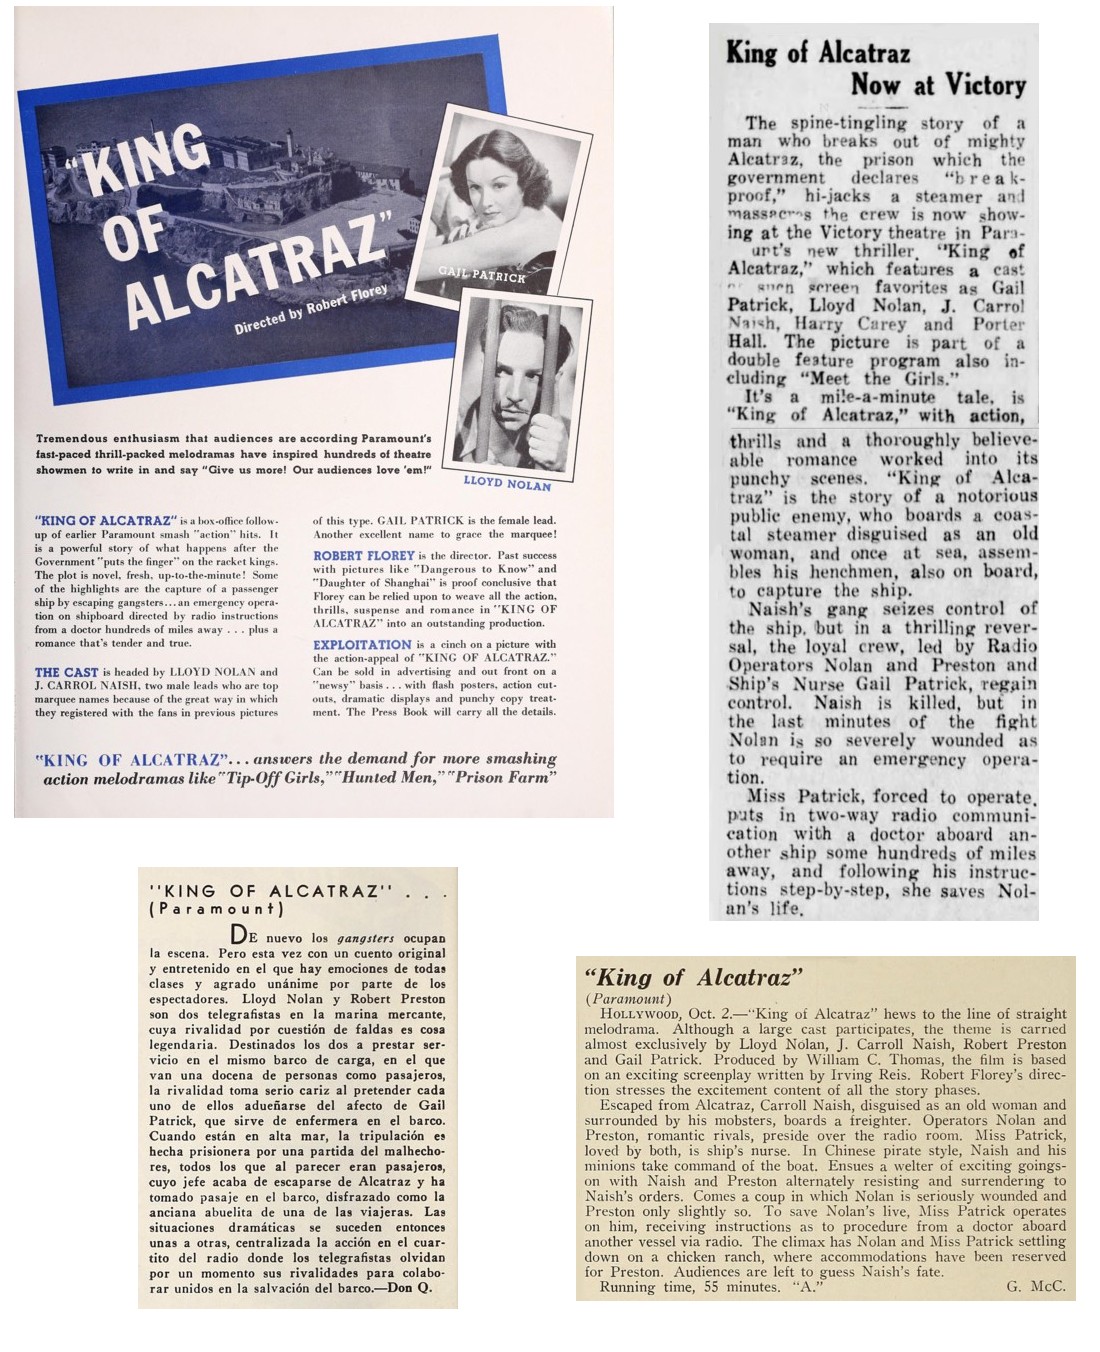 King of Alcatraz film reviews one page ad